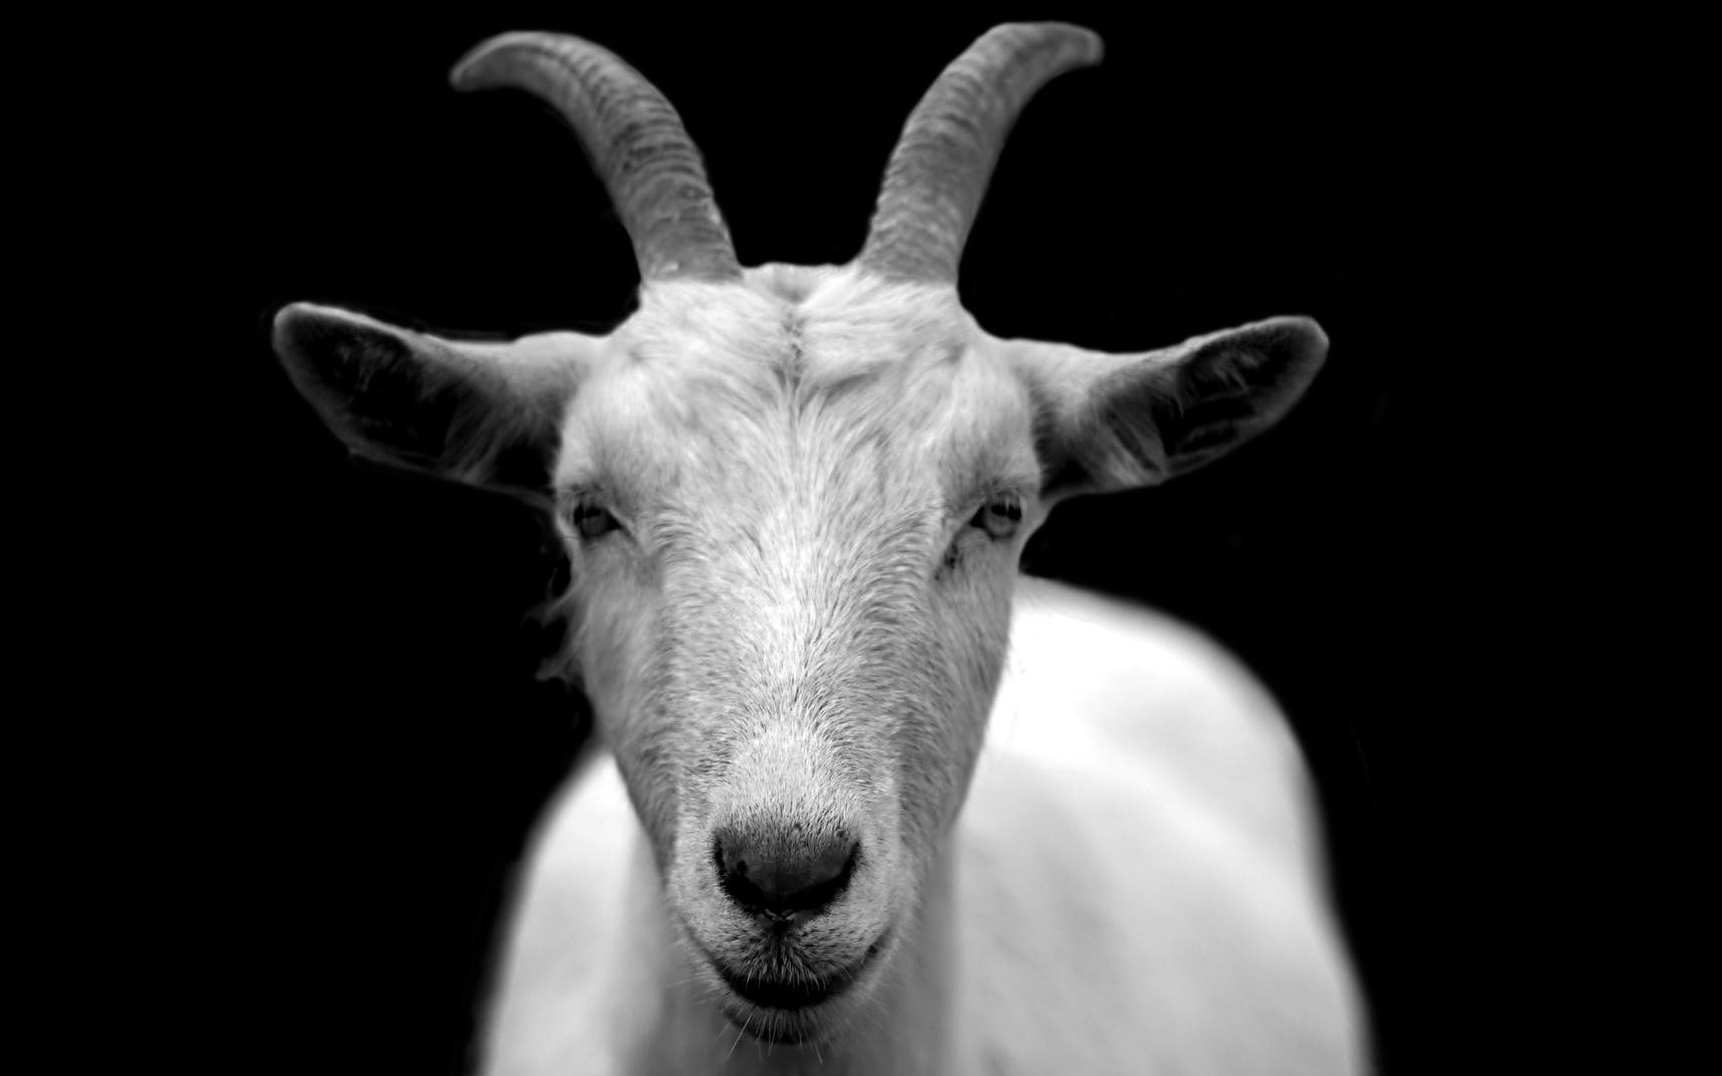 Today goats... and goats | blog